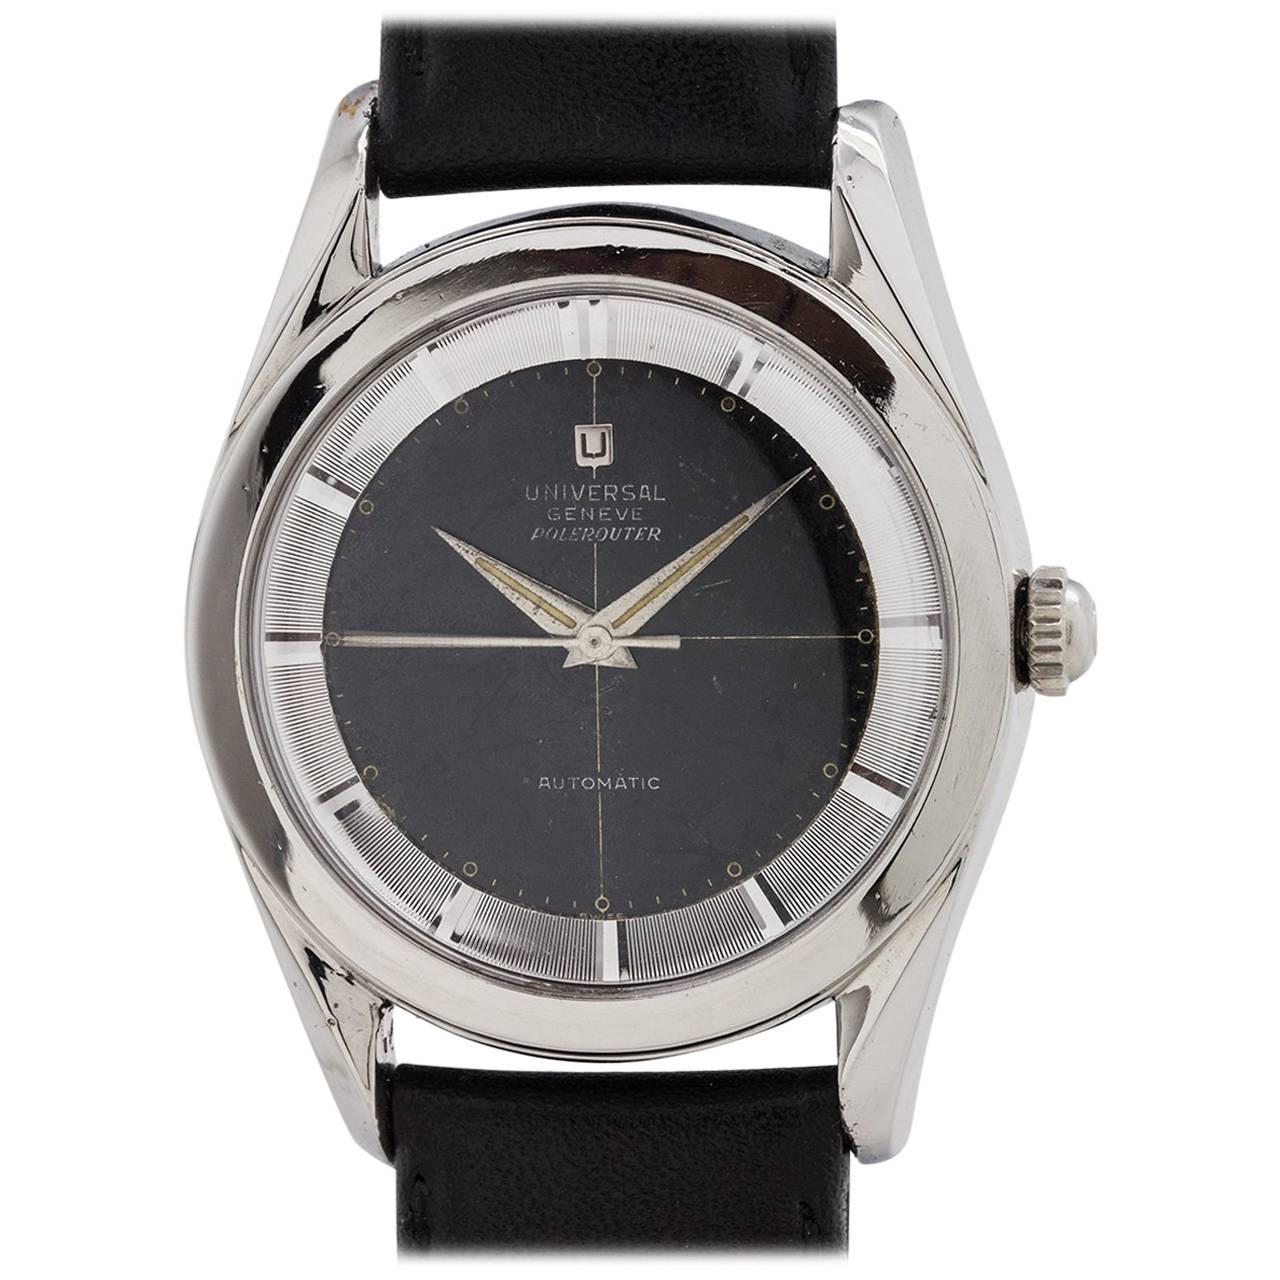 Universal stainless Steel Geneve Polerouter Black Dial Automatic Wristwatch